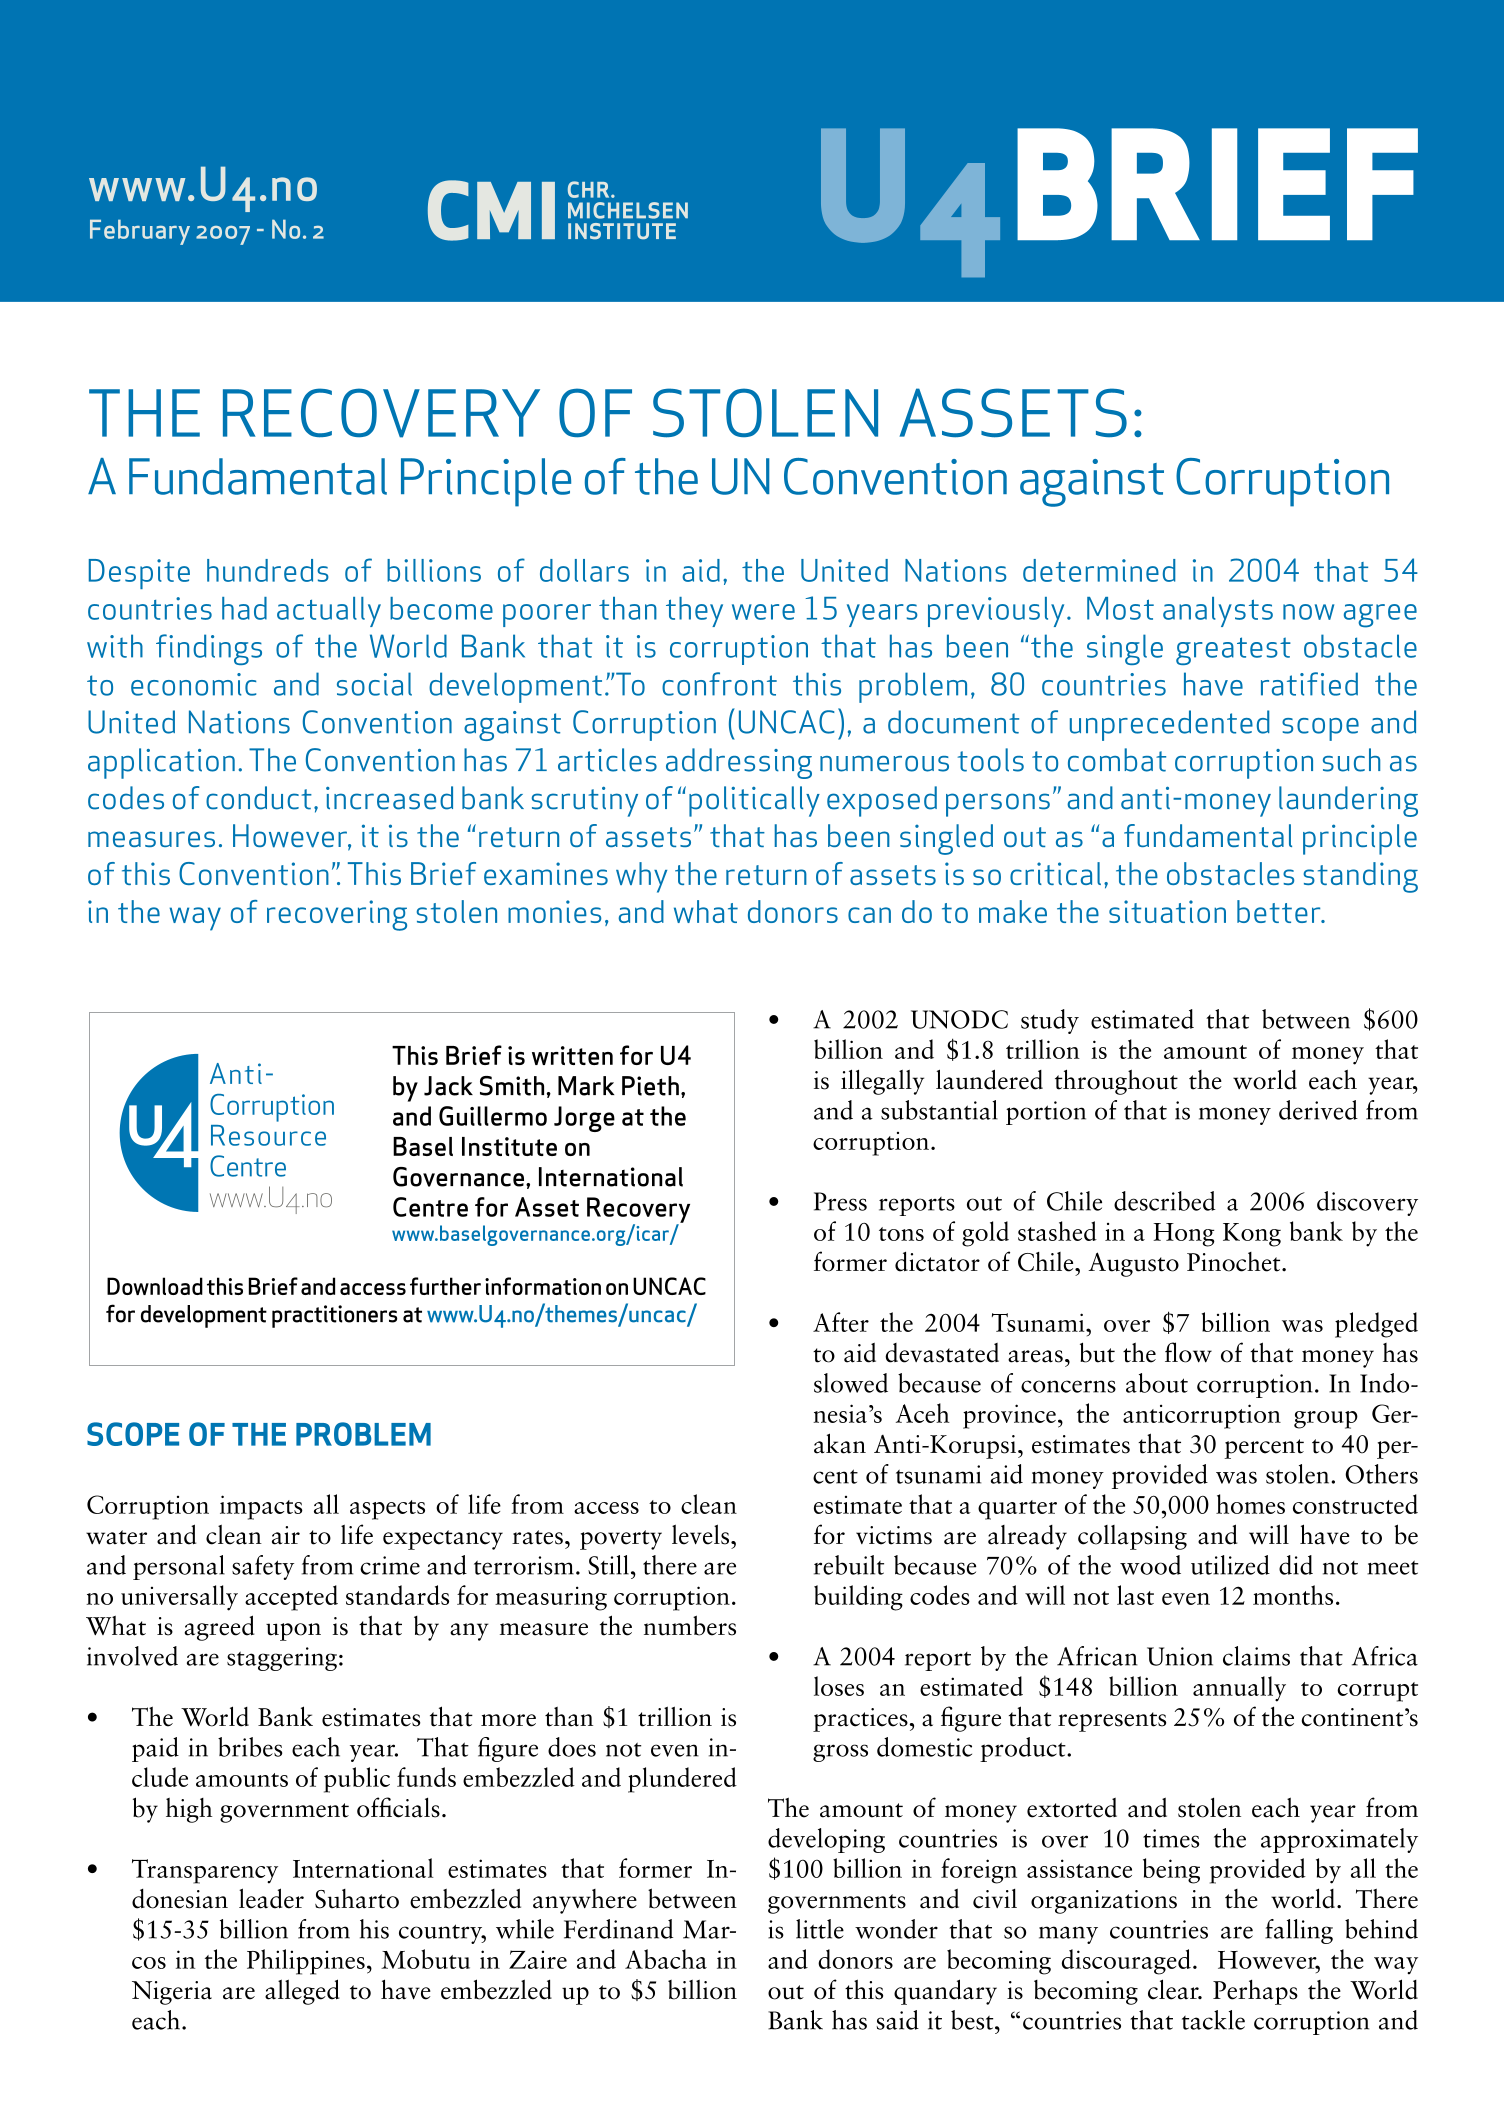 The recovery of stolen assets: A fundamental principle of the UN Convention against Corruption